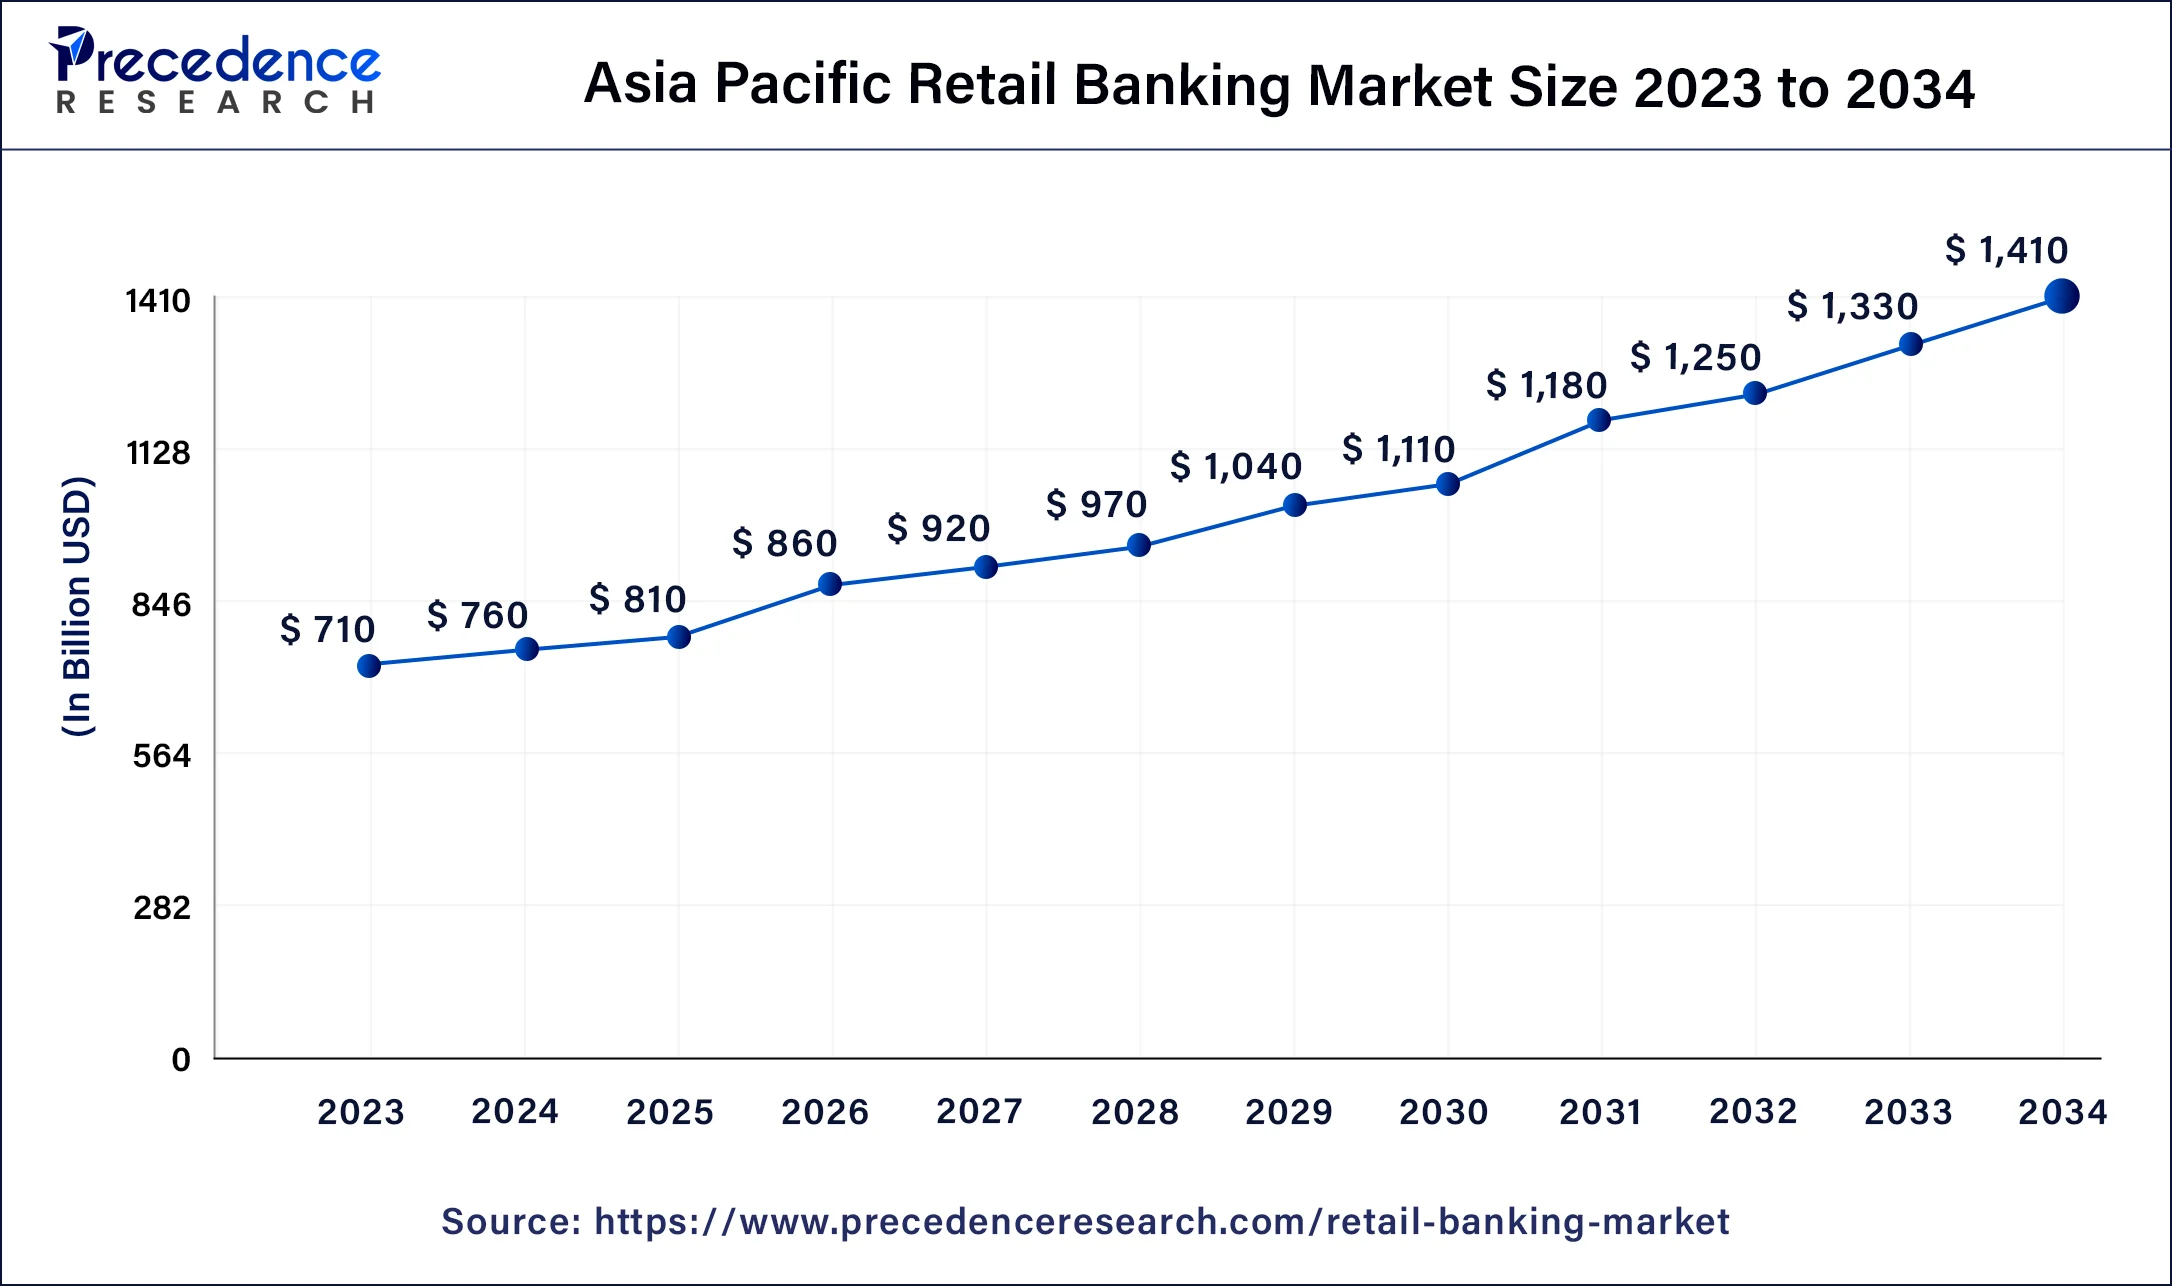 Asia Pacific Retail Banking Market Size 2024 to 2034